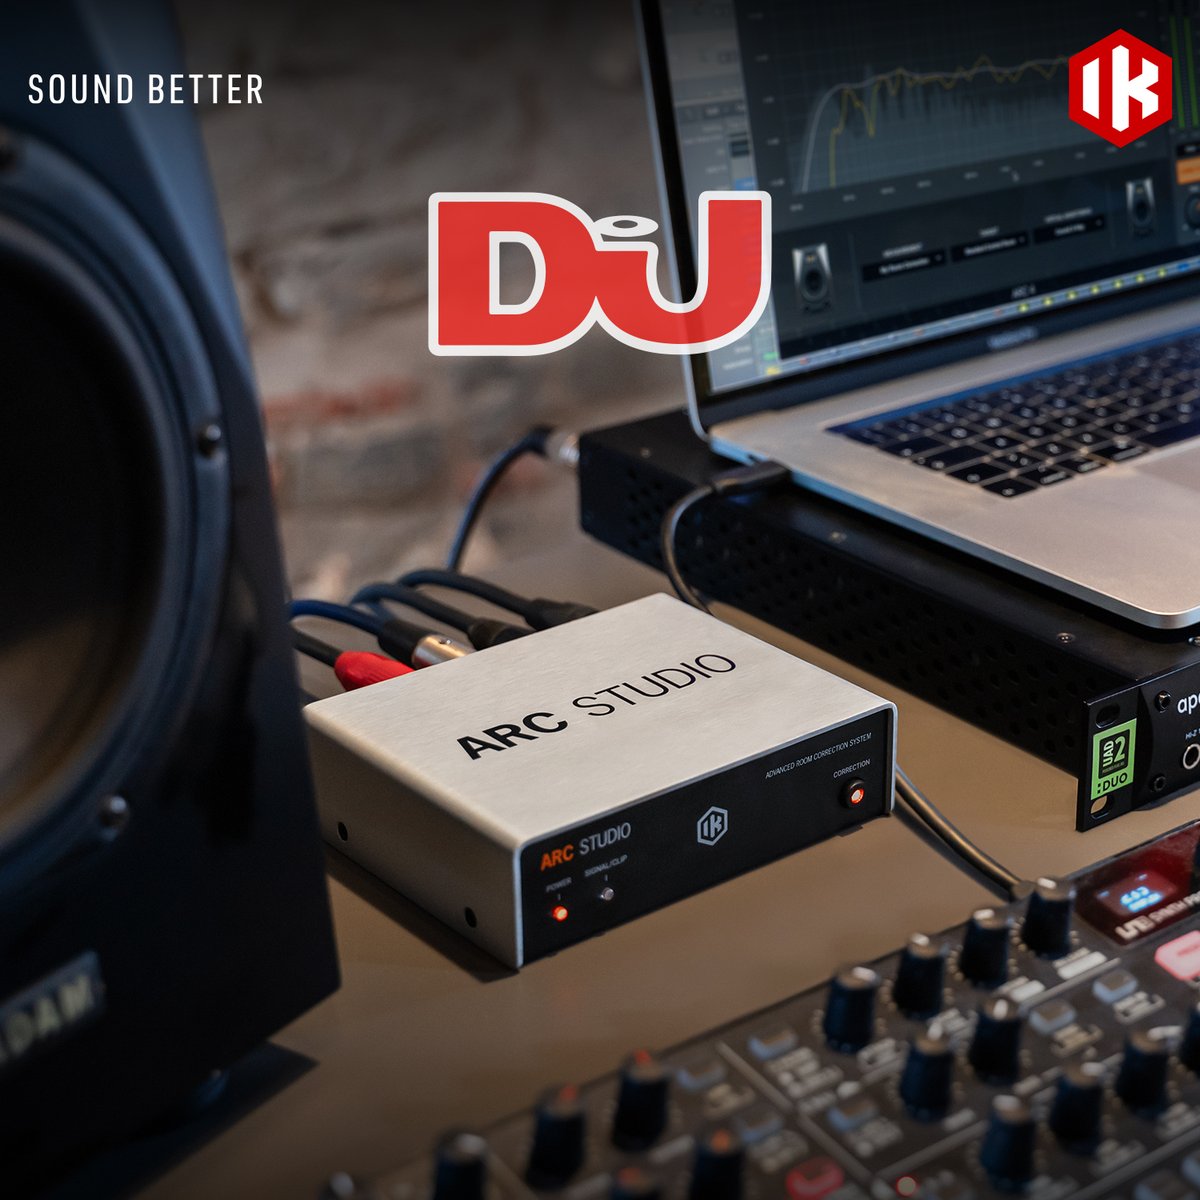 'ARC Studio will enable producers, engineers, home and project studio owners to set up their speaker system and rooms to deliver a true and natural transparent sound.' Check out @DJMag's look into our new hardware room correction system. ➡️ bit.ly/djmagarcstudio